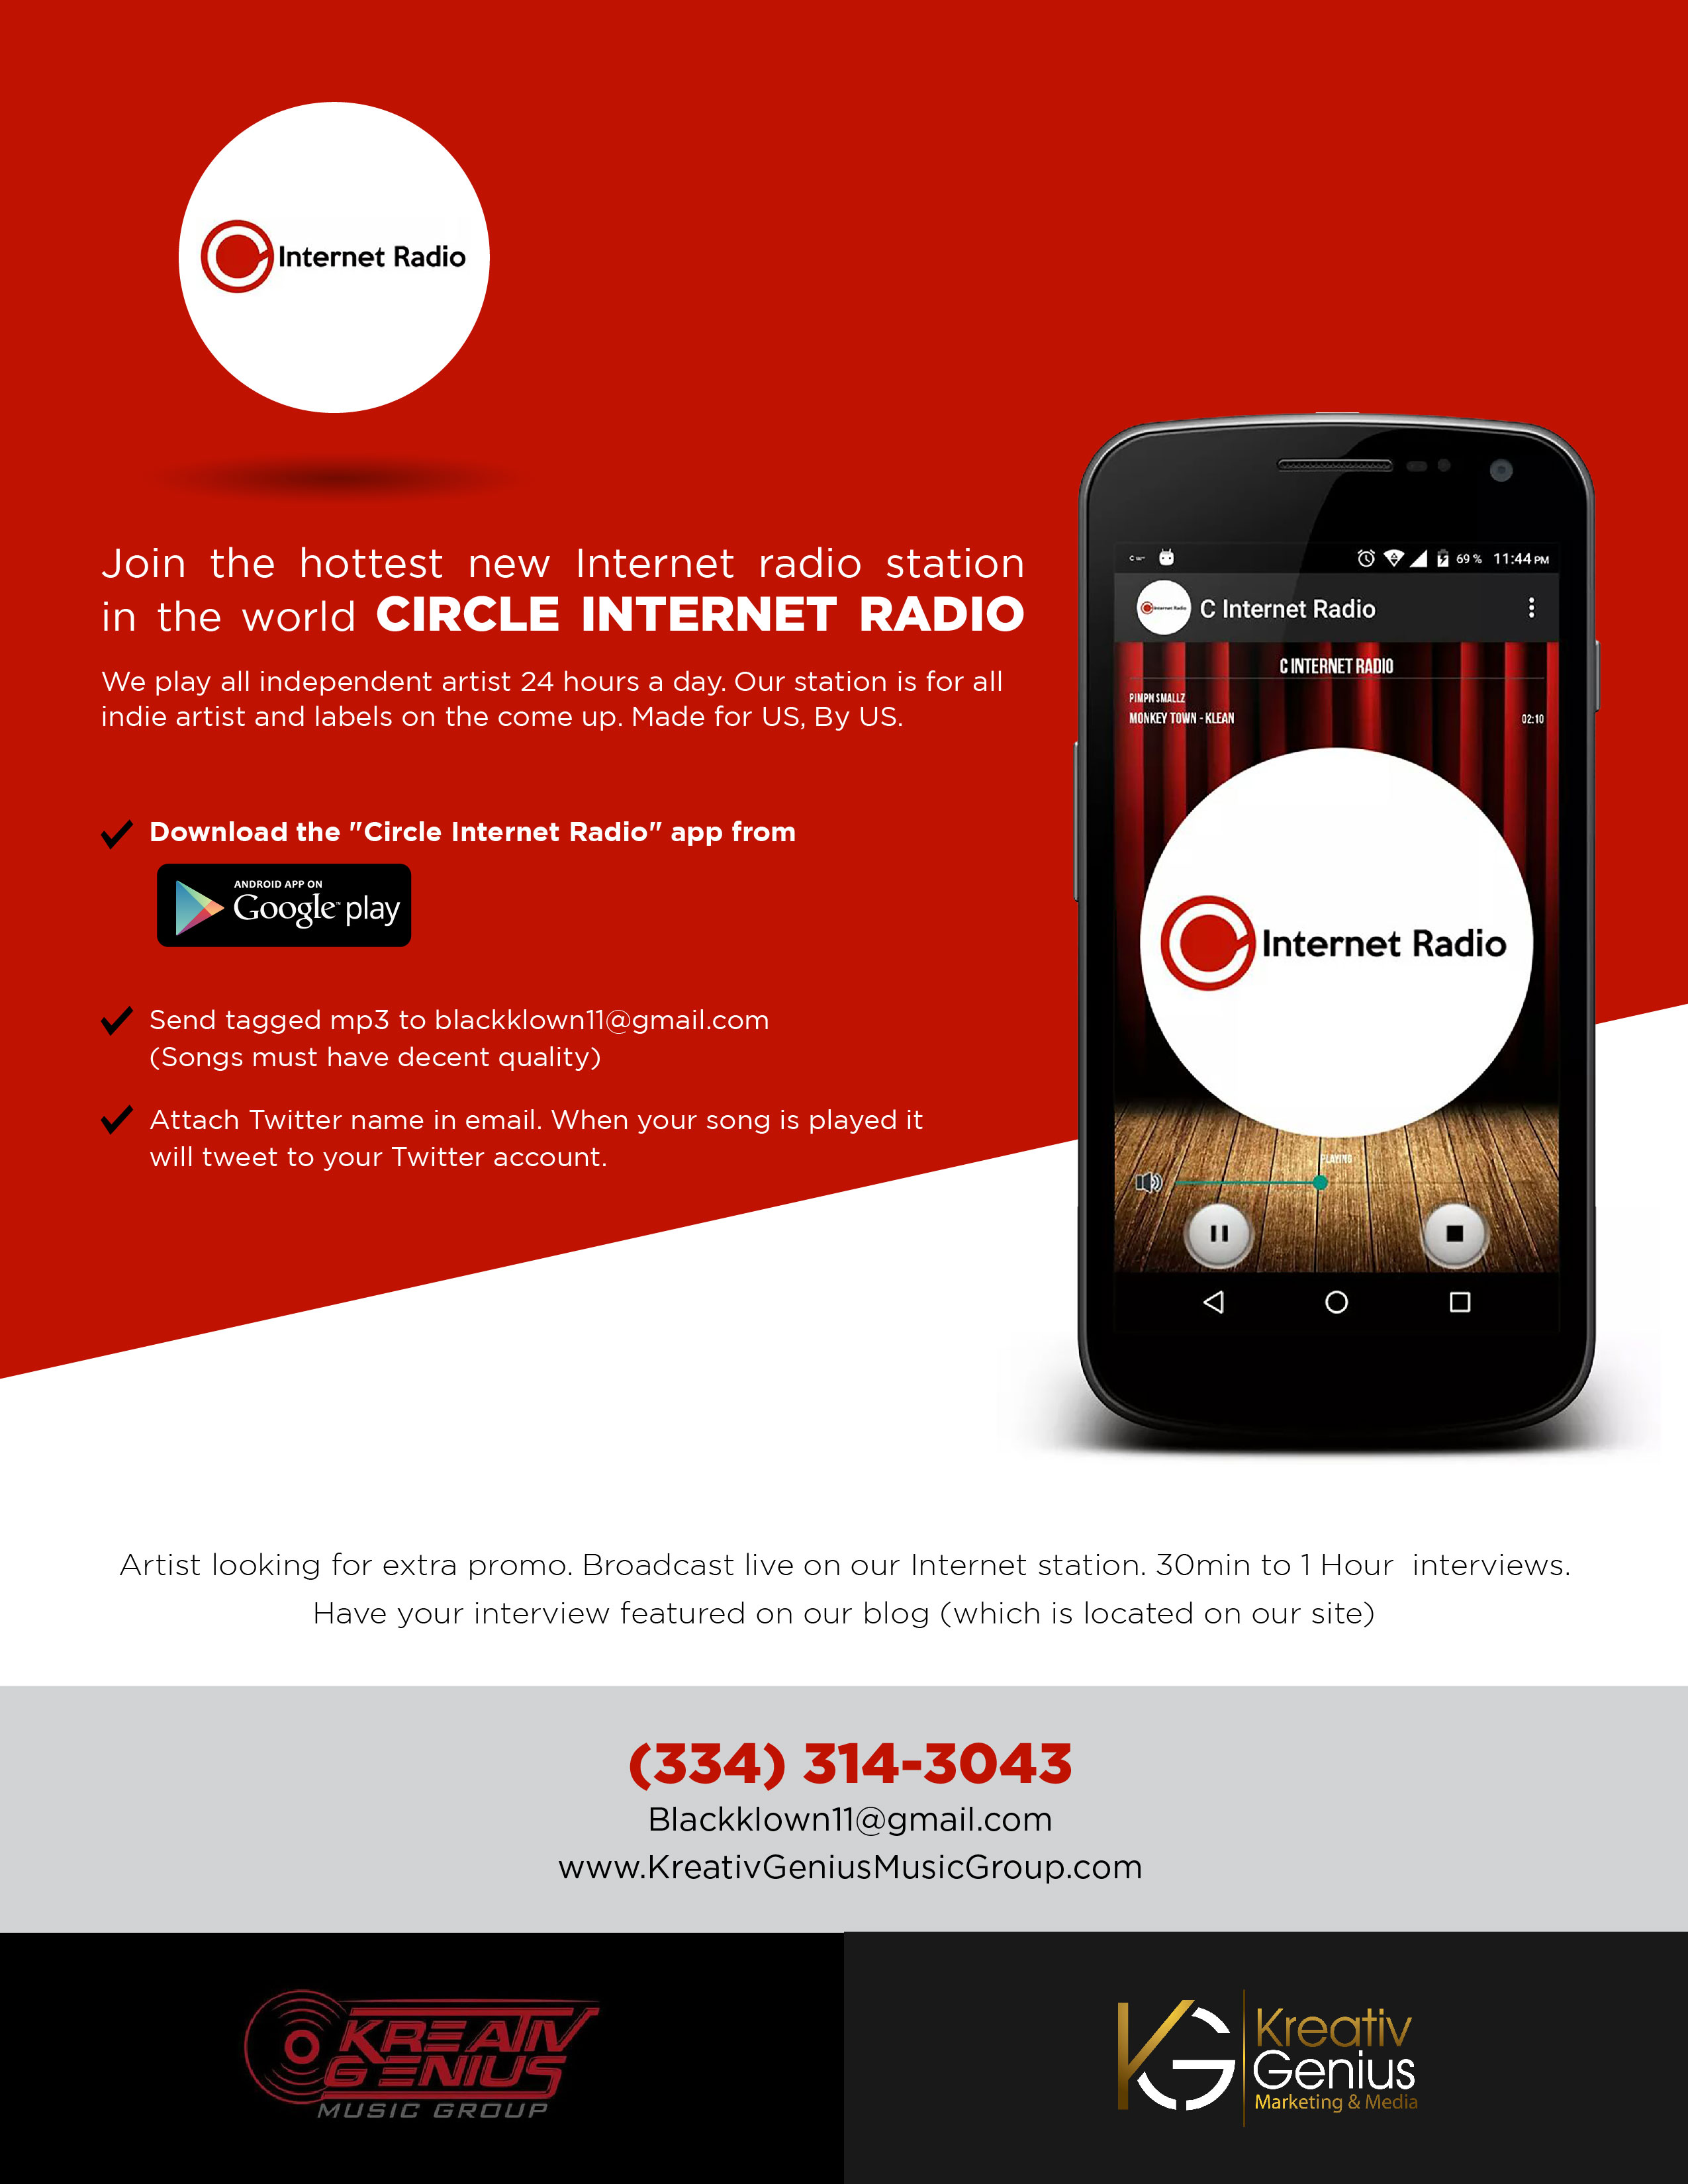 #1 Spot For Indie Music. JOIN THE CIRCLE!!! ‘Circle Internet Radio’ @TheRealBurnOne